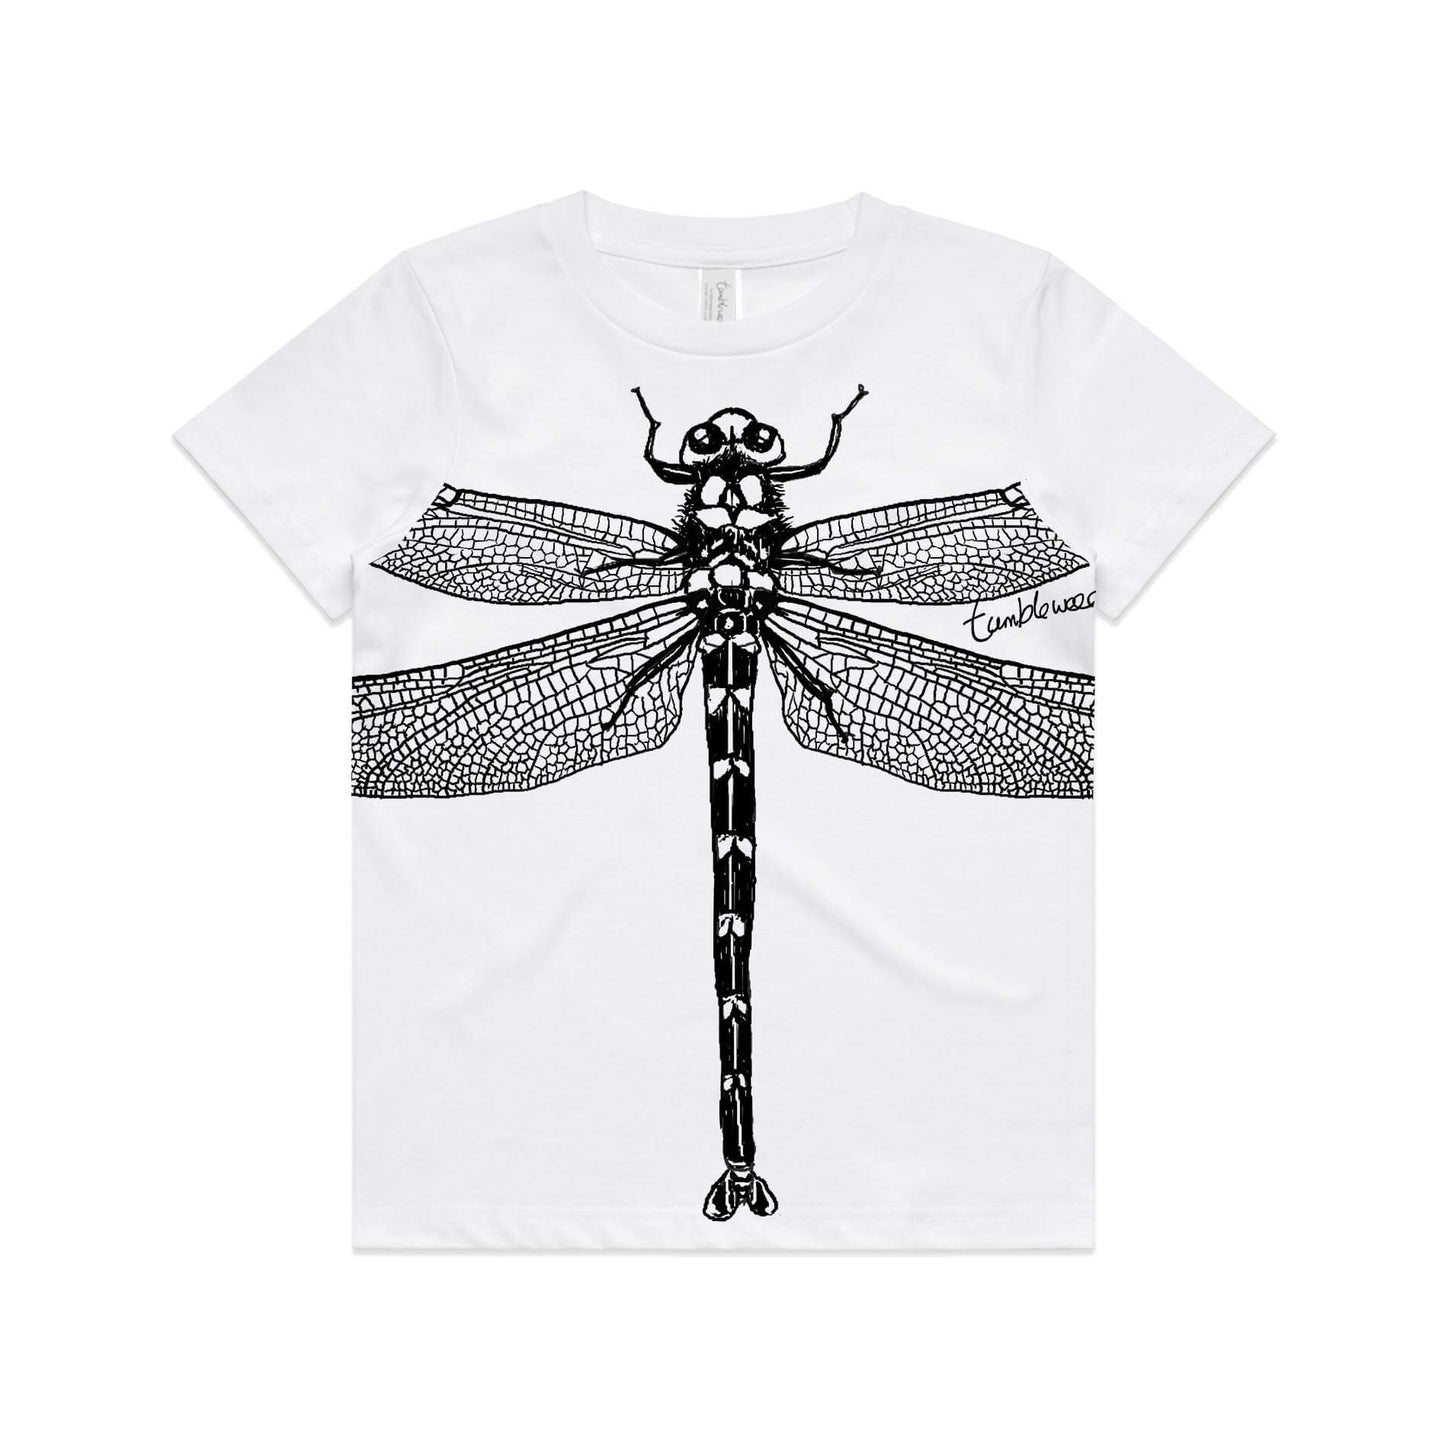 White, cotton kids' t-shirt with screen printed Kids dragonfly design.